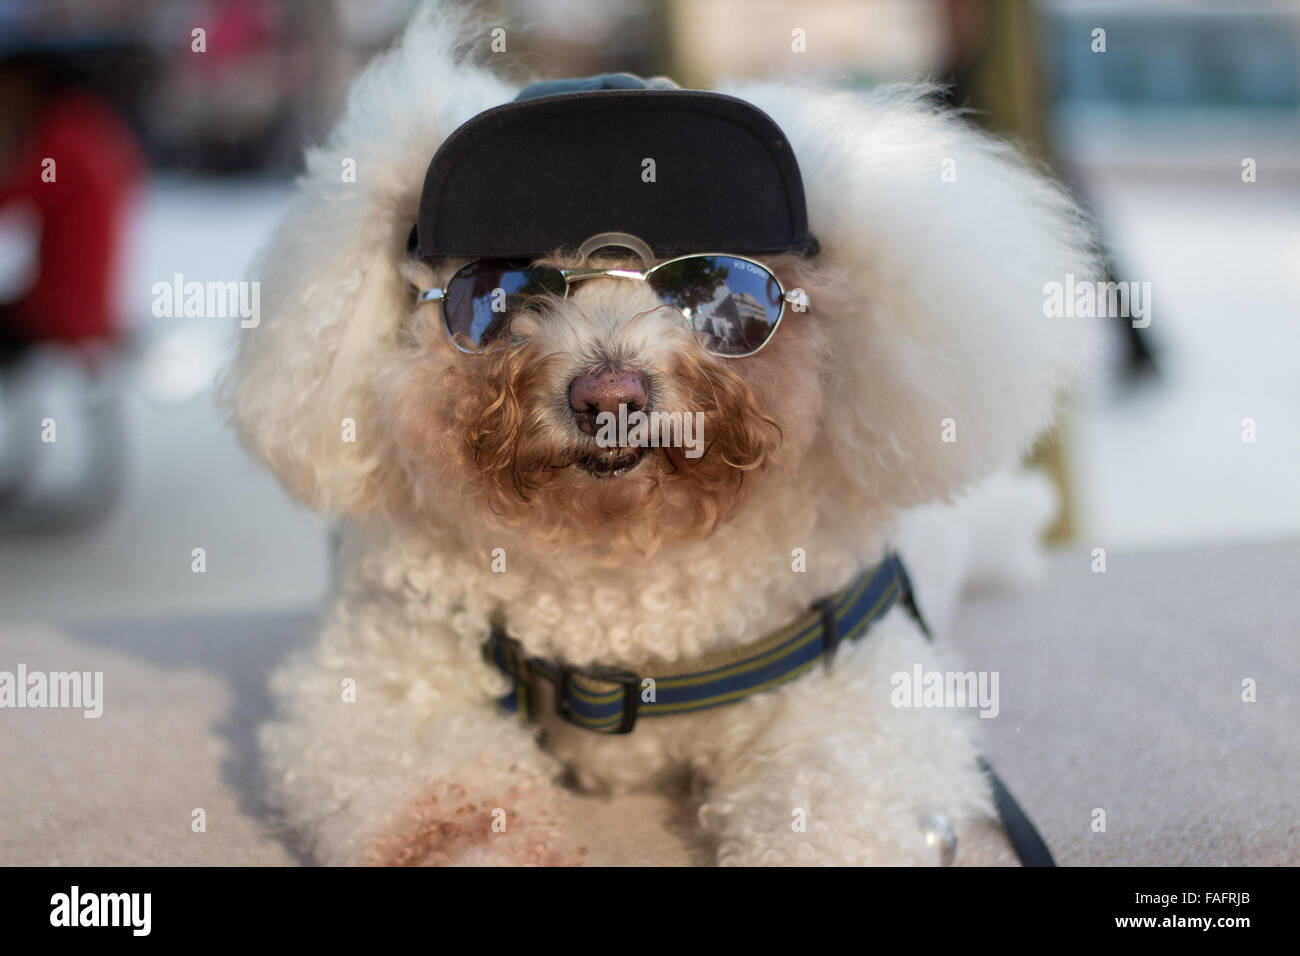 Bichon Frise dressed up in cap and sunglasses. Stock Photo